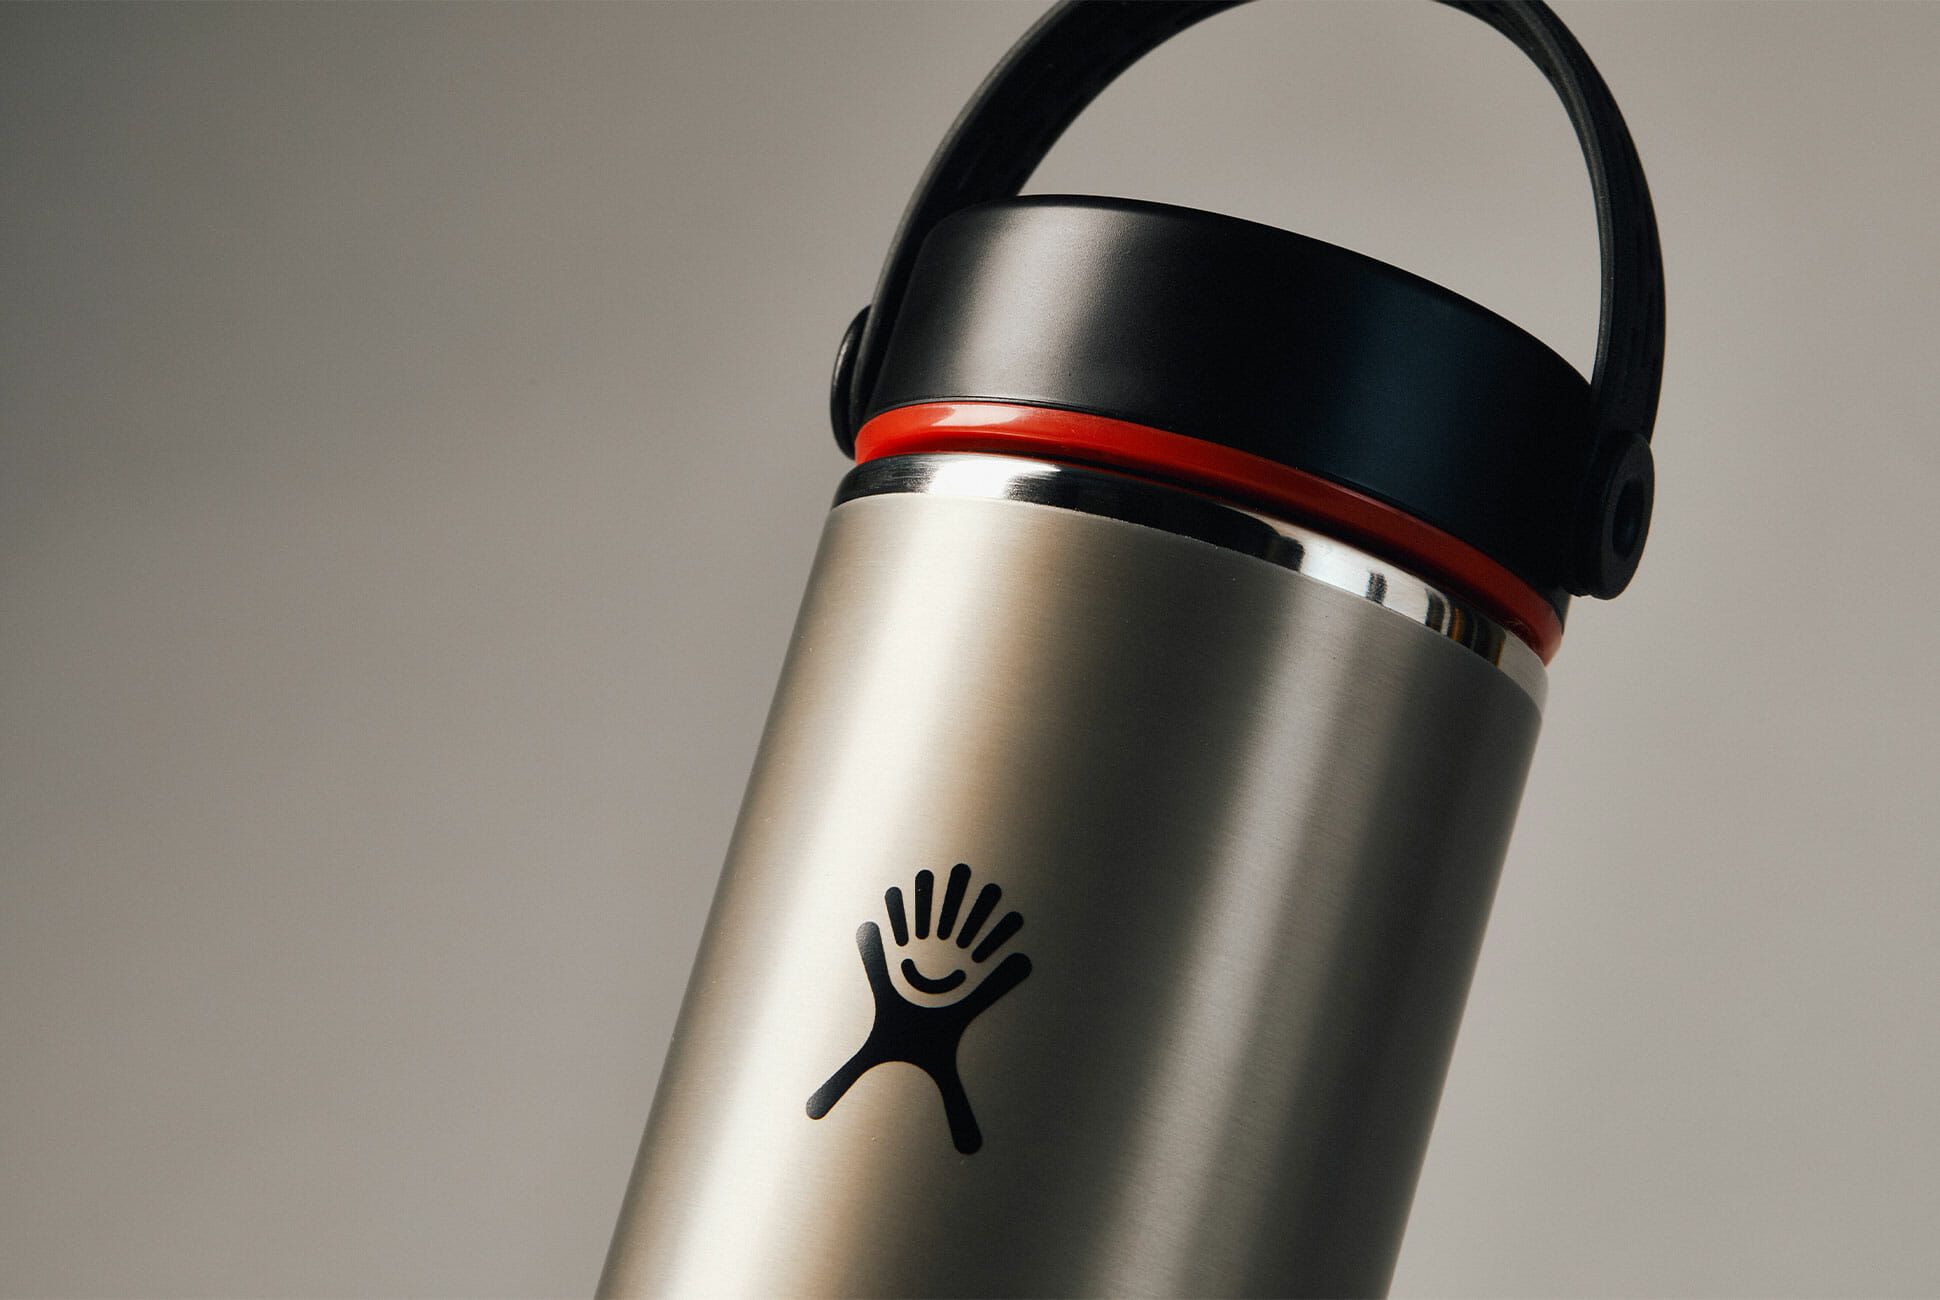 Why Hydro Flask Lightweight Water Bottle So Special